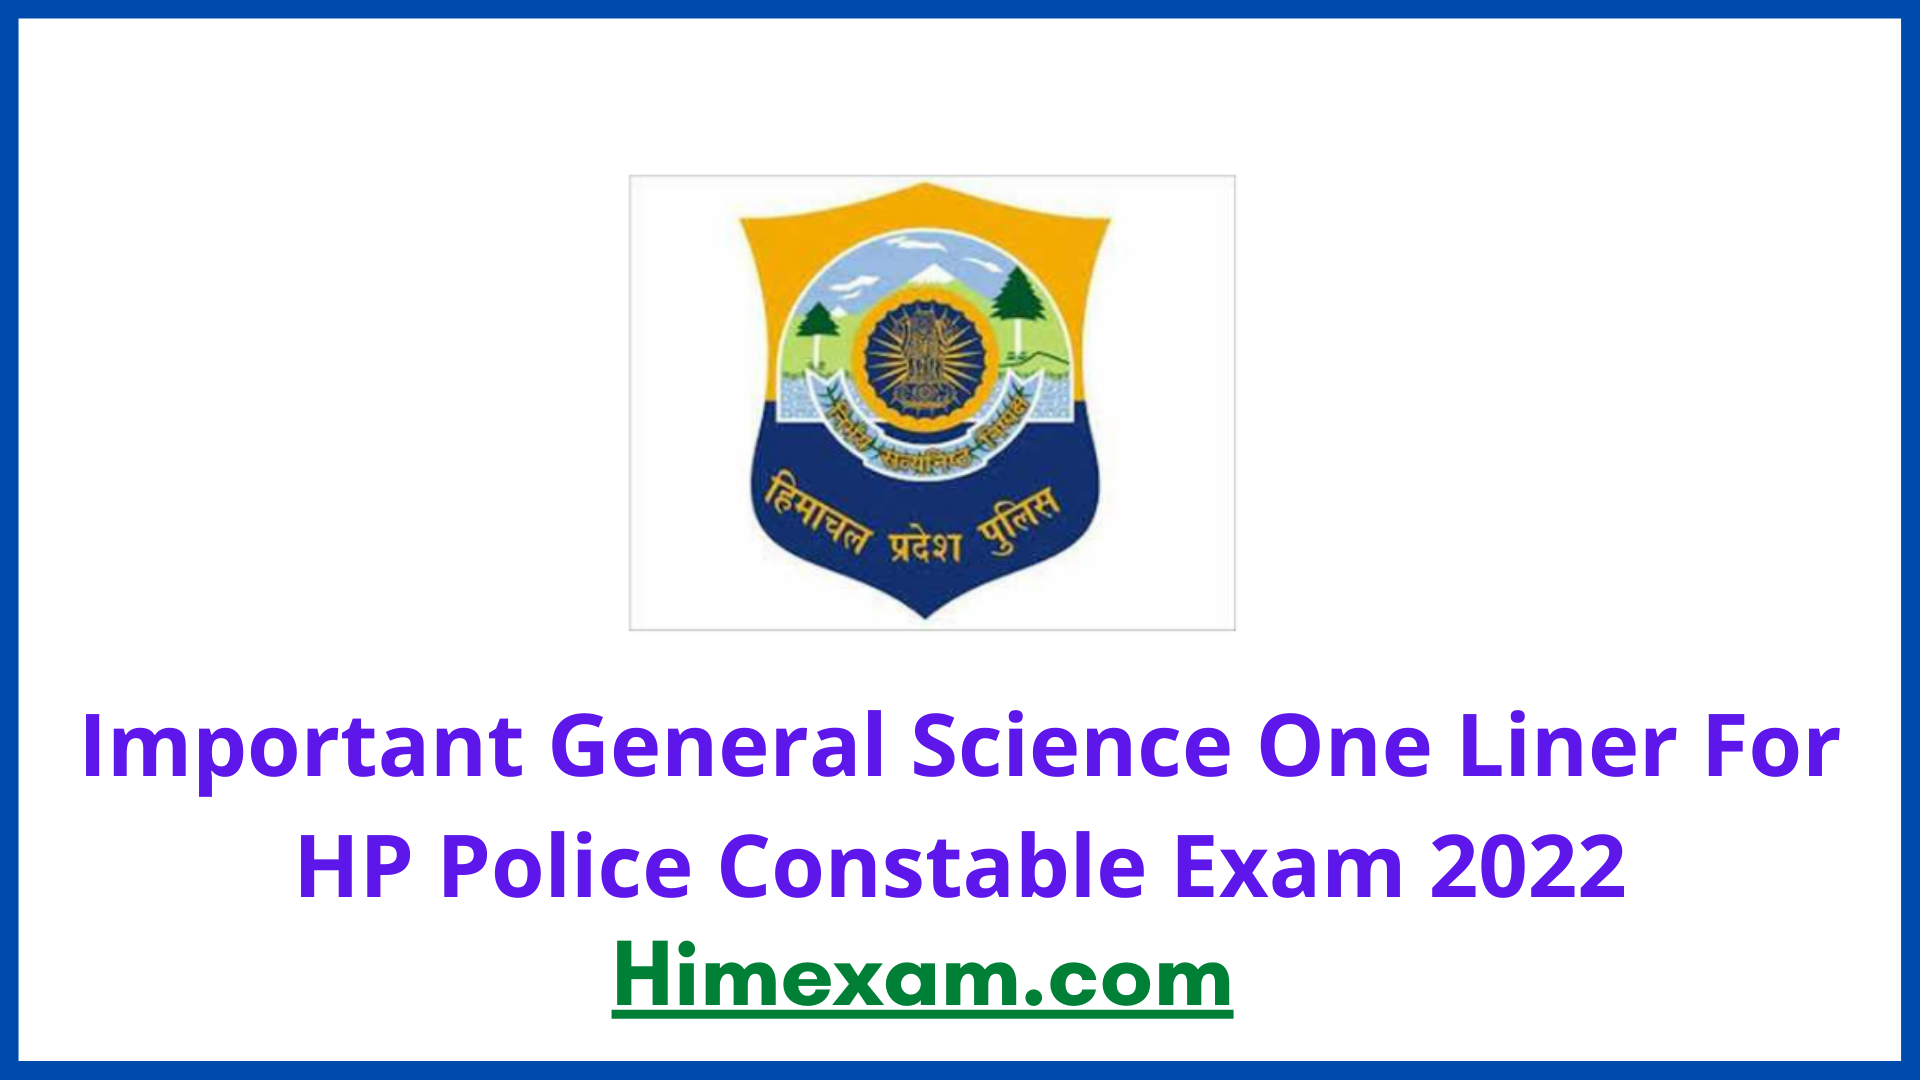 Important General Science One Liner For HP Police Constable Exam 2022